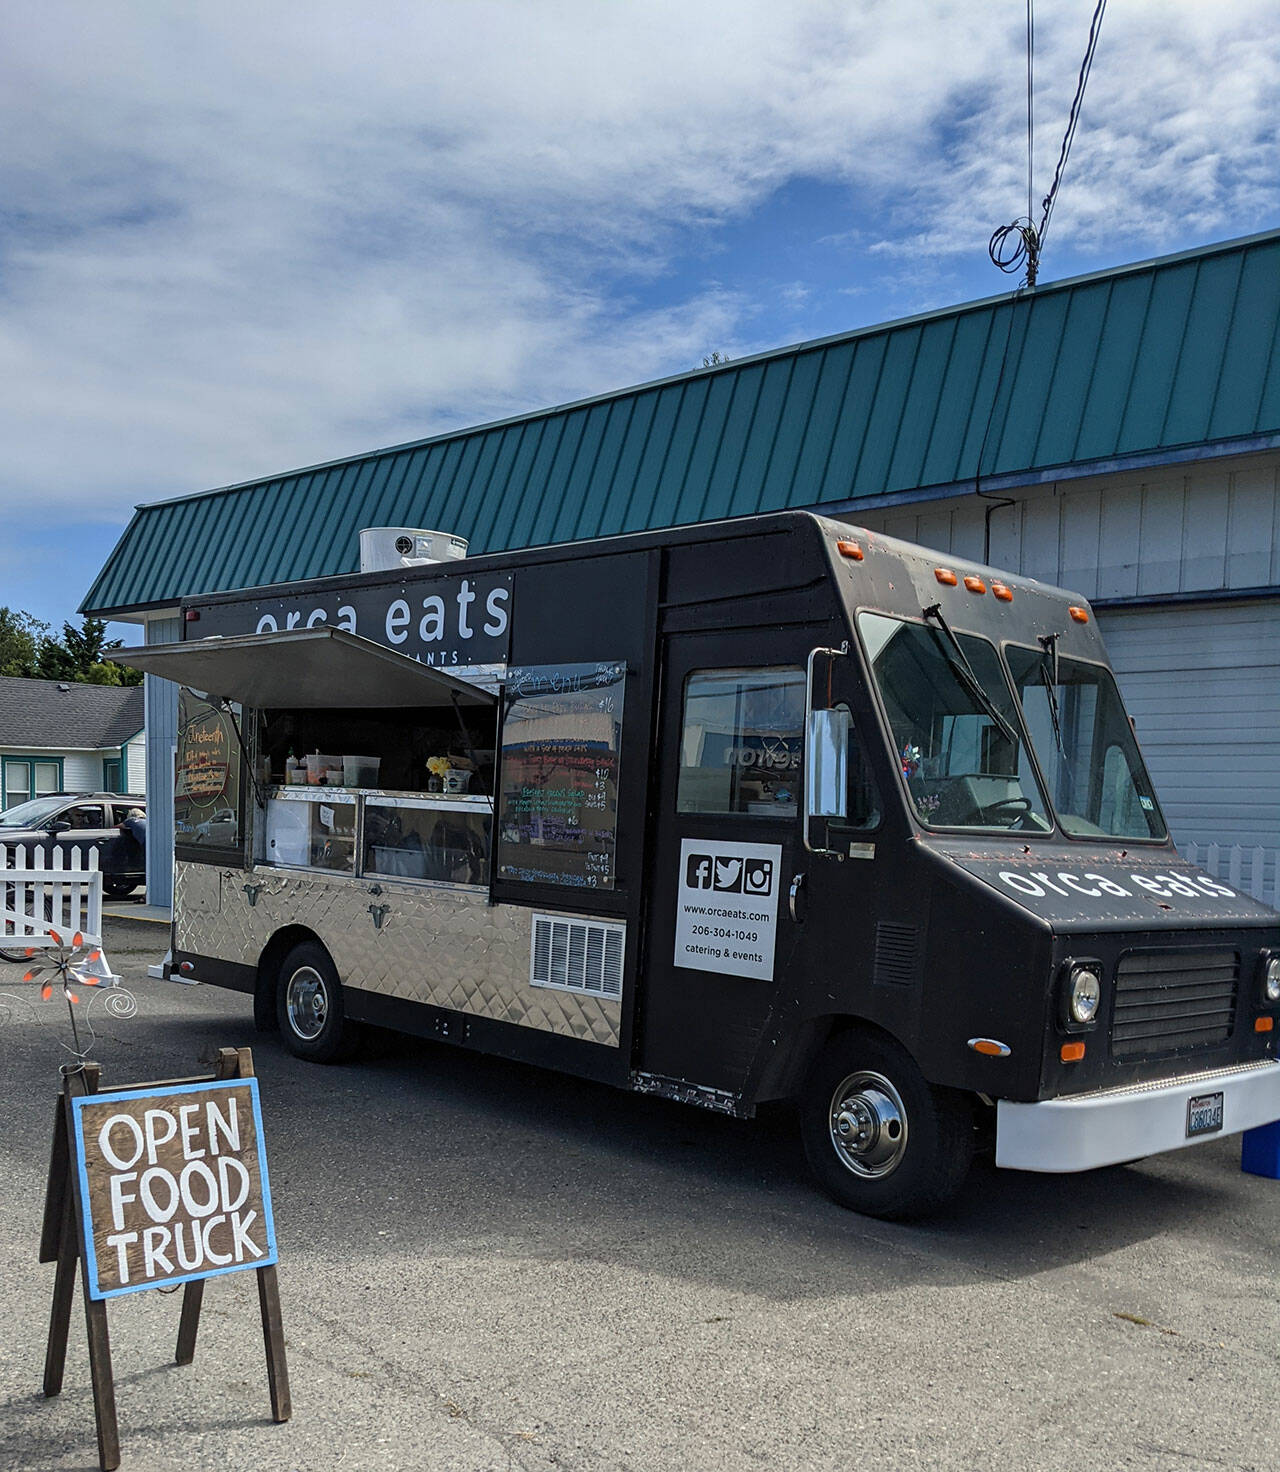 (Photo Courtesy Emily Wigley) The Orca Eats food truck serves locally sourced entrees, desserts and beverages.